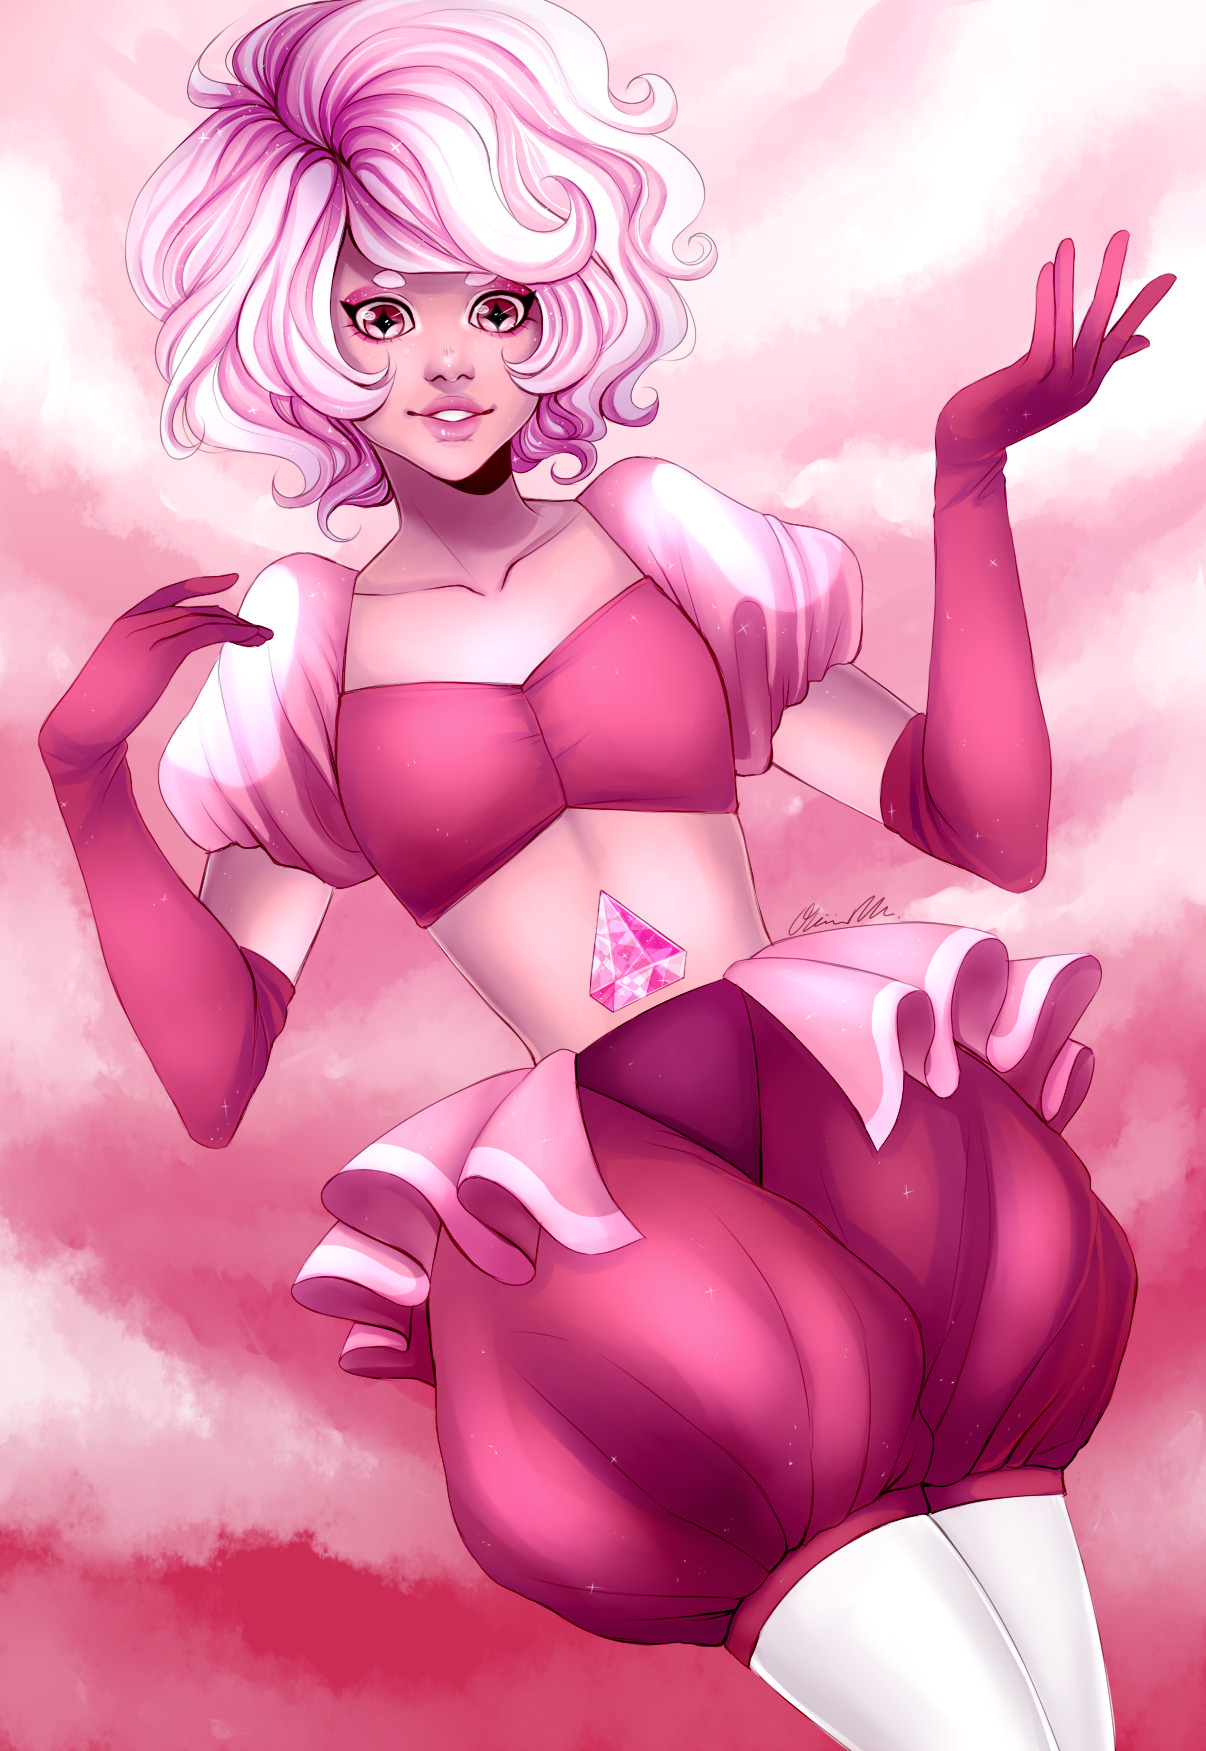 PD probably has my favorite design out of all the characters.. pink + floofiness? Sign me the FUCK up